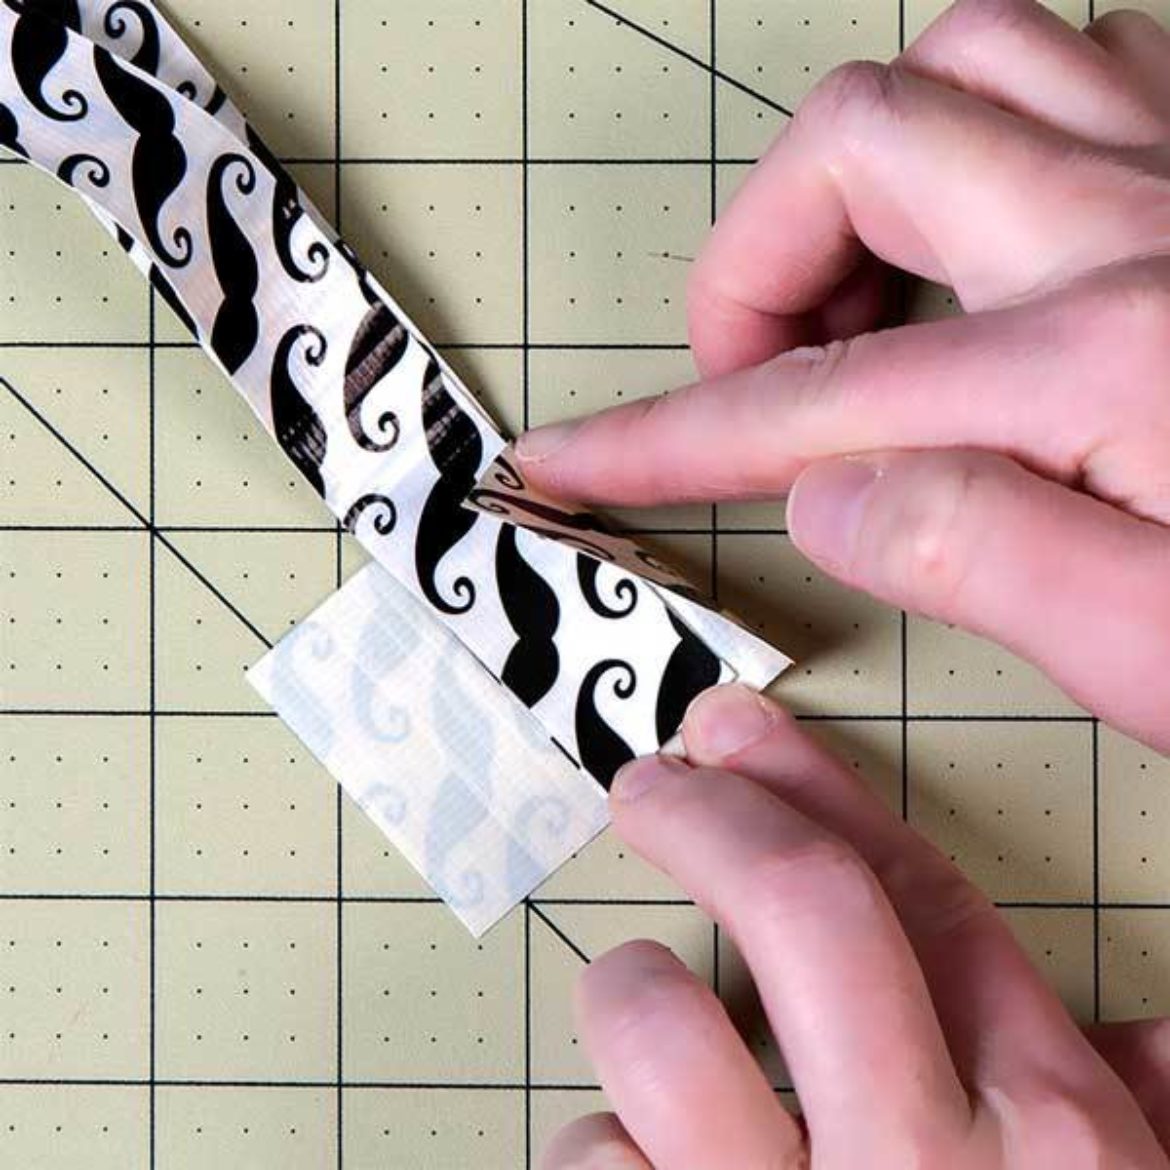 place the two ends of the strip from the previous step together so that they meet and tape them together